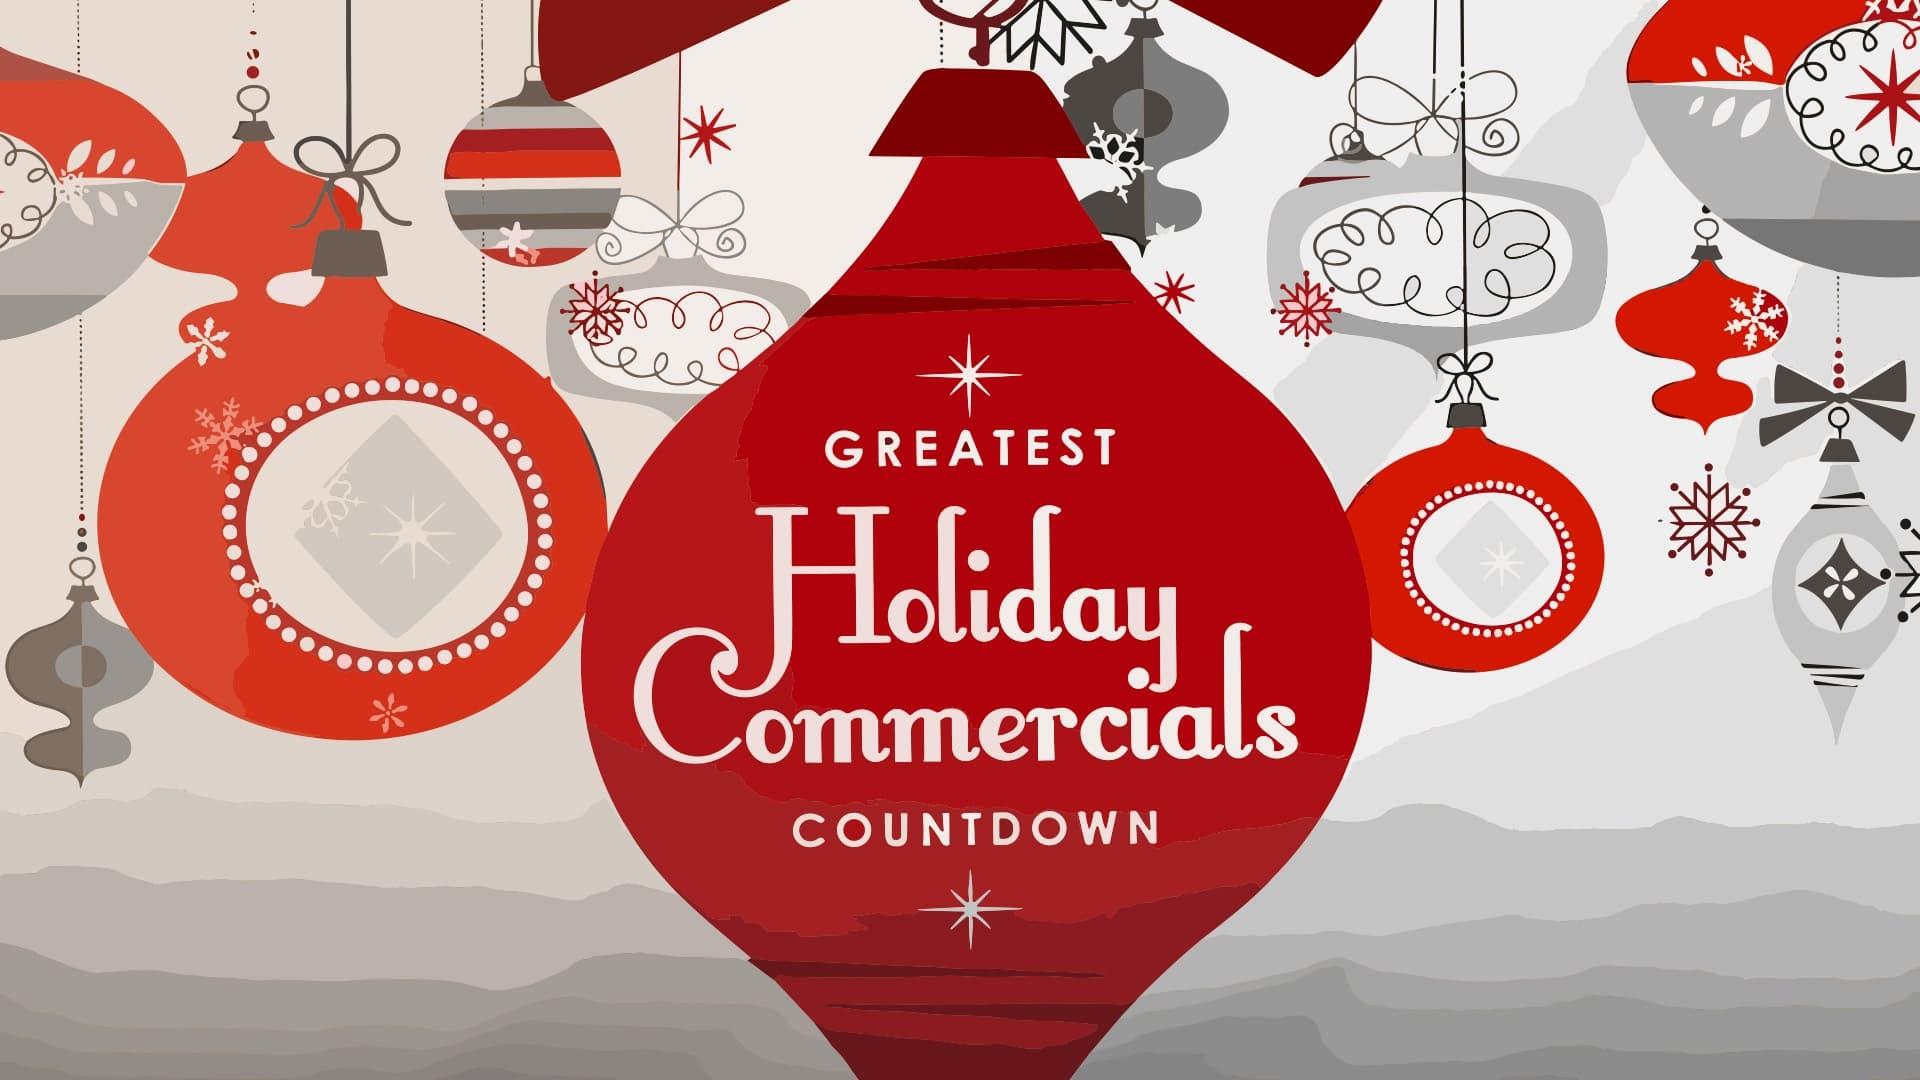 Greatest Holiday Commercials Countdown 2022 backdrop